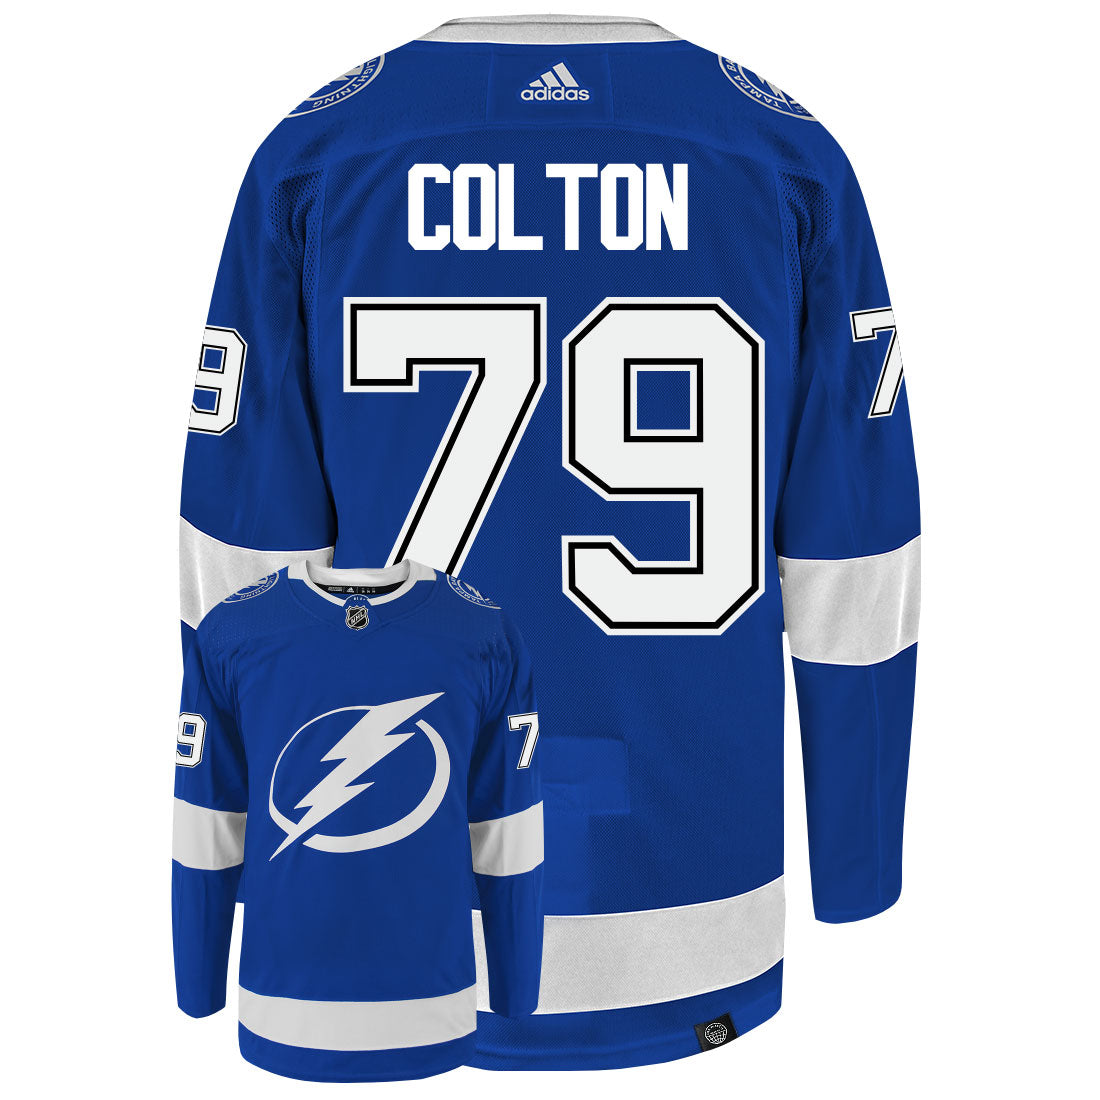 Ross Colton Tampa Bay Lightning Adidas Primegreen Authentic NHL Hockey Jersey - Back/Front View